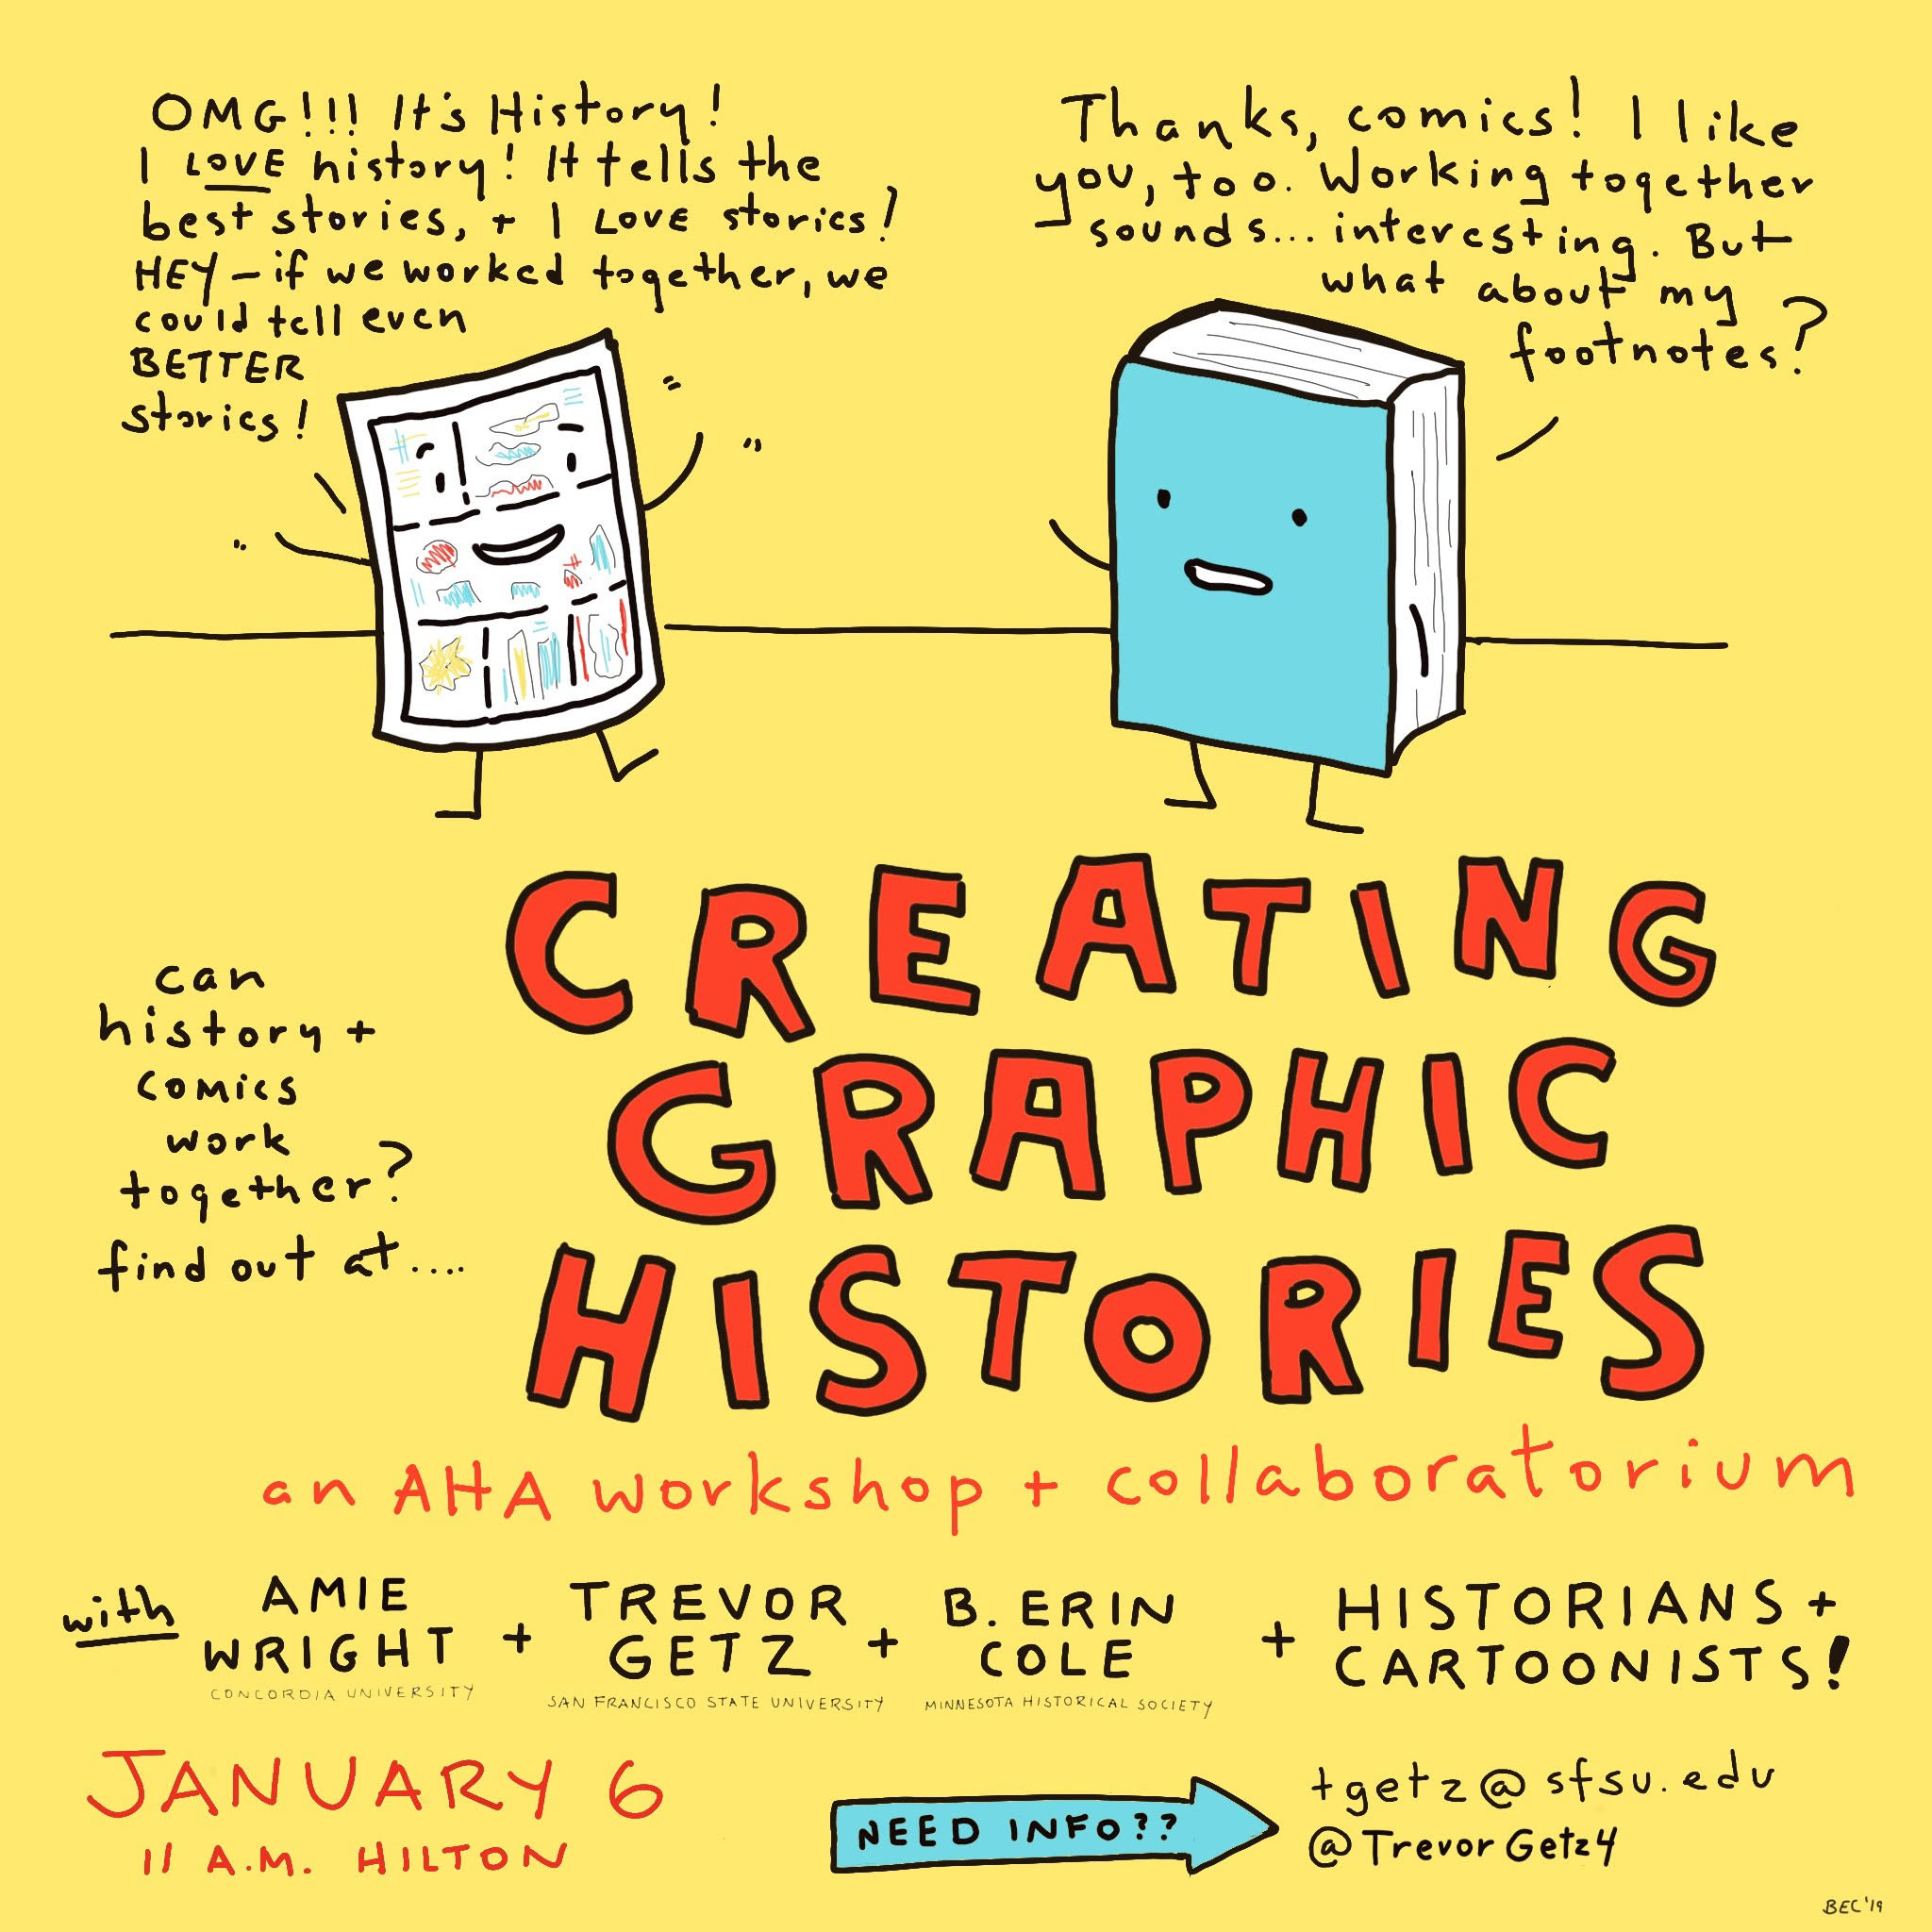 Erin Cole promoted the “Creating Graphic Histories” session with her own artwork.